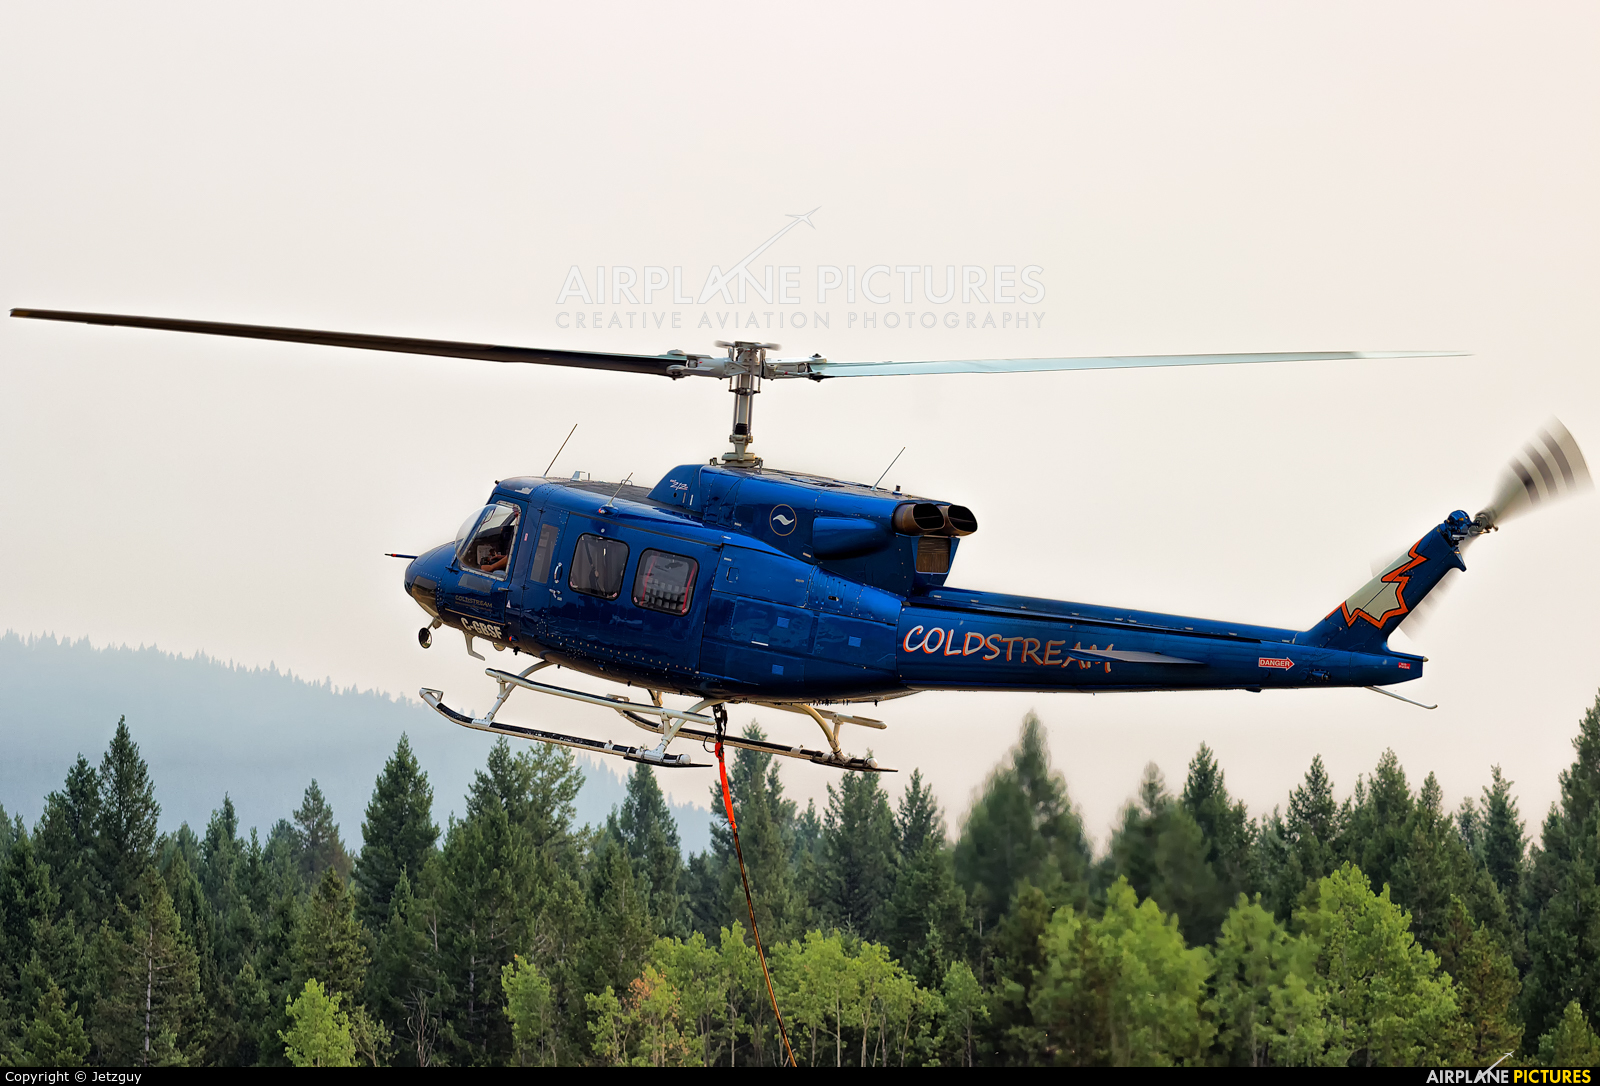 Coldstream Helicopters C-GBSF aircraft at 108 Mile Ranch, BC